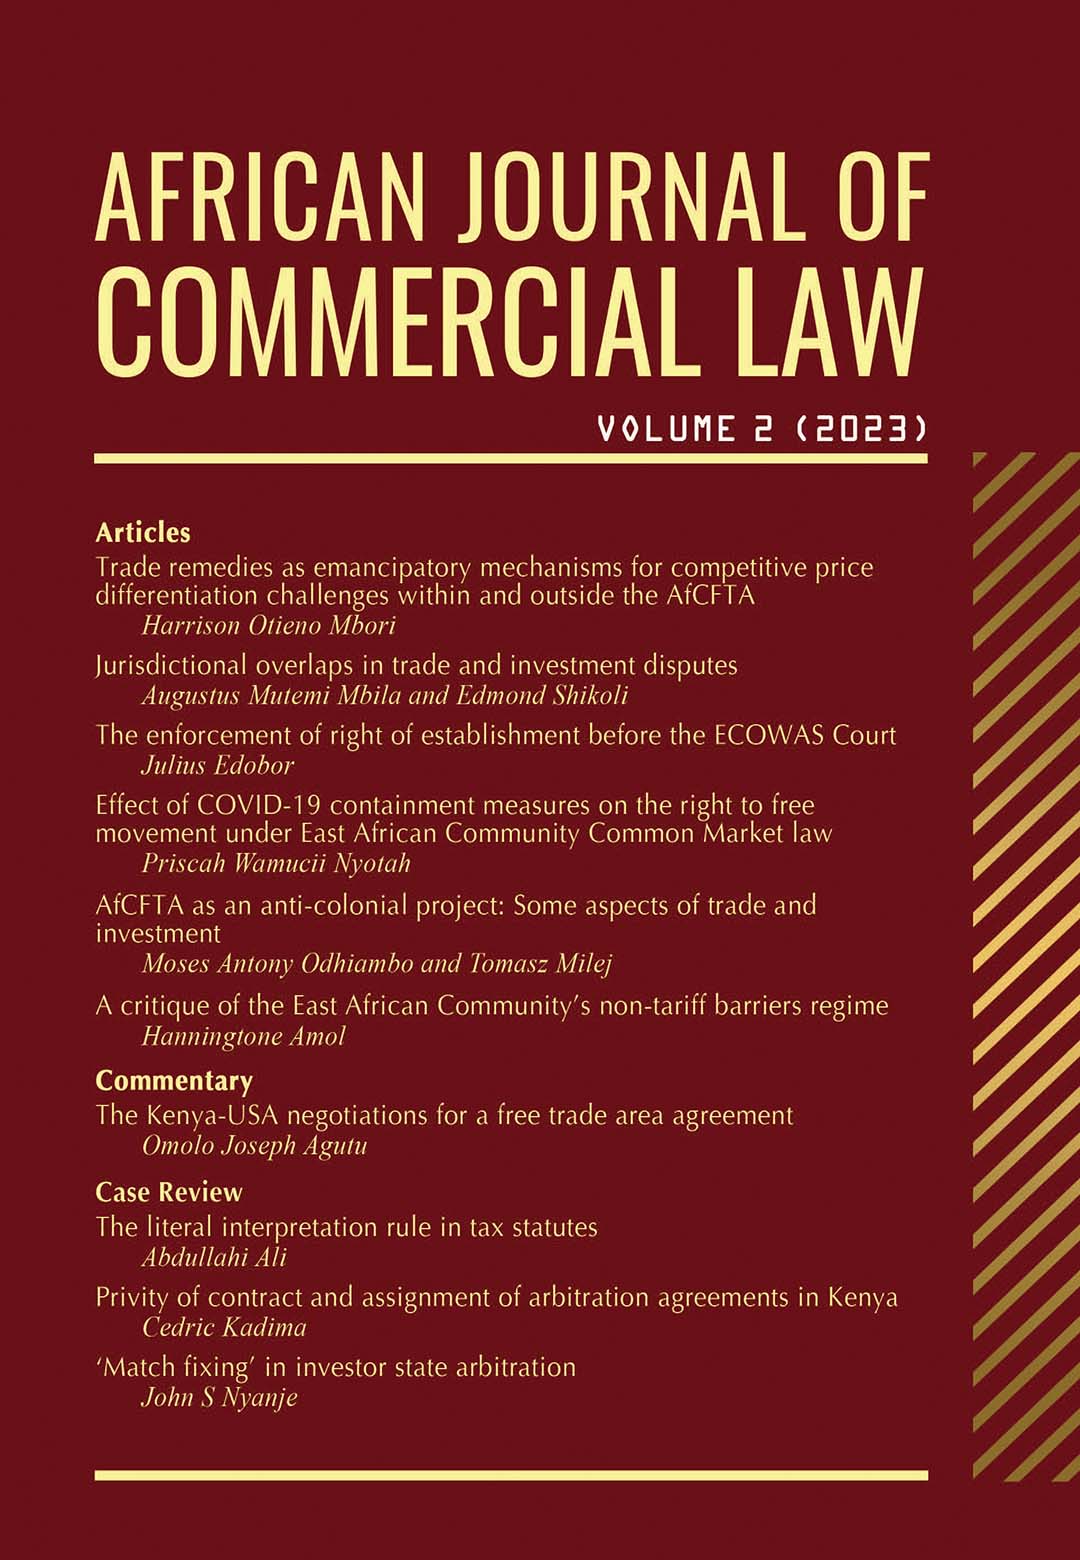 					View Vol. 2 No. 1 (2023): African Journal of Commercial Law
				